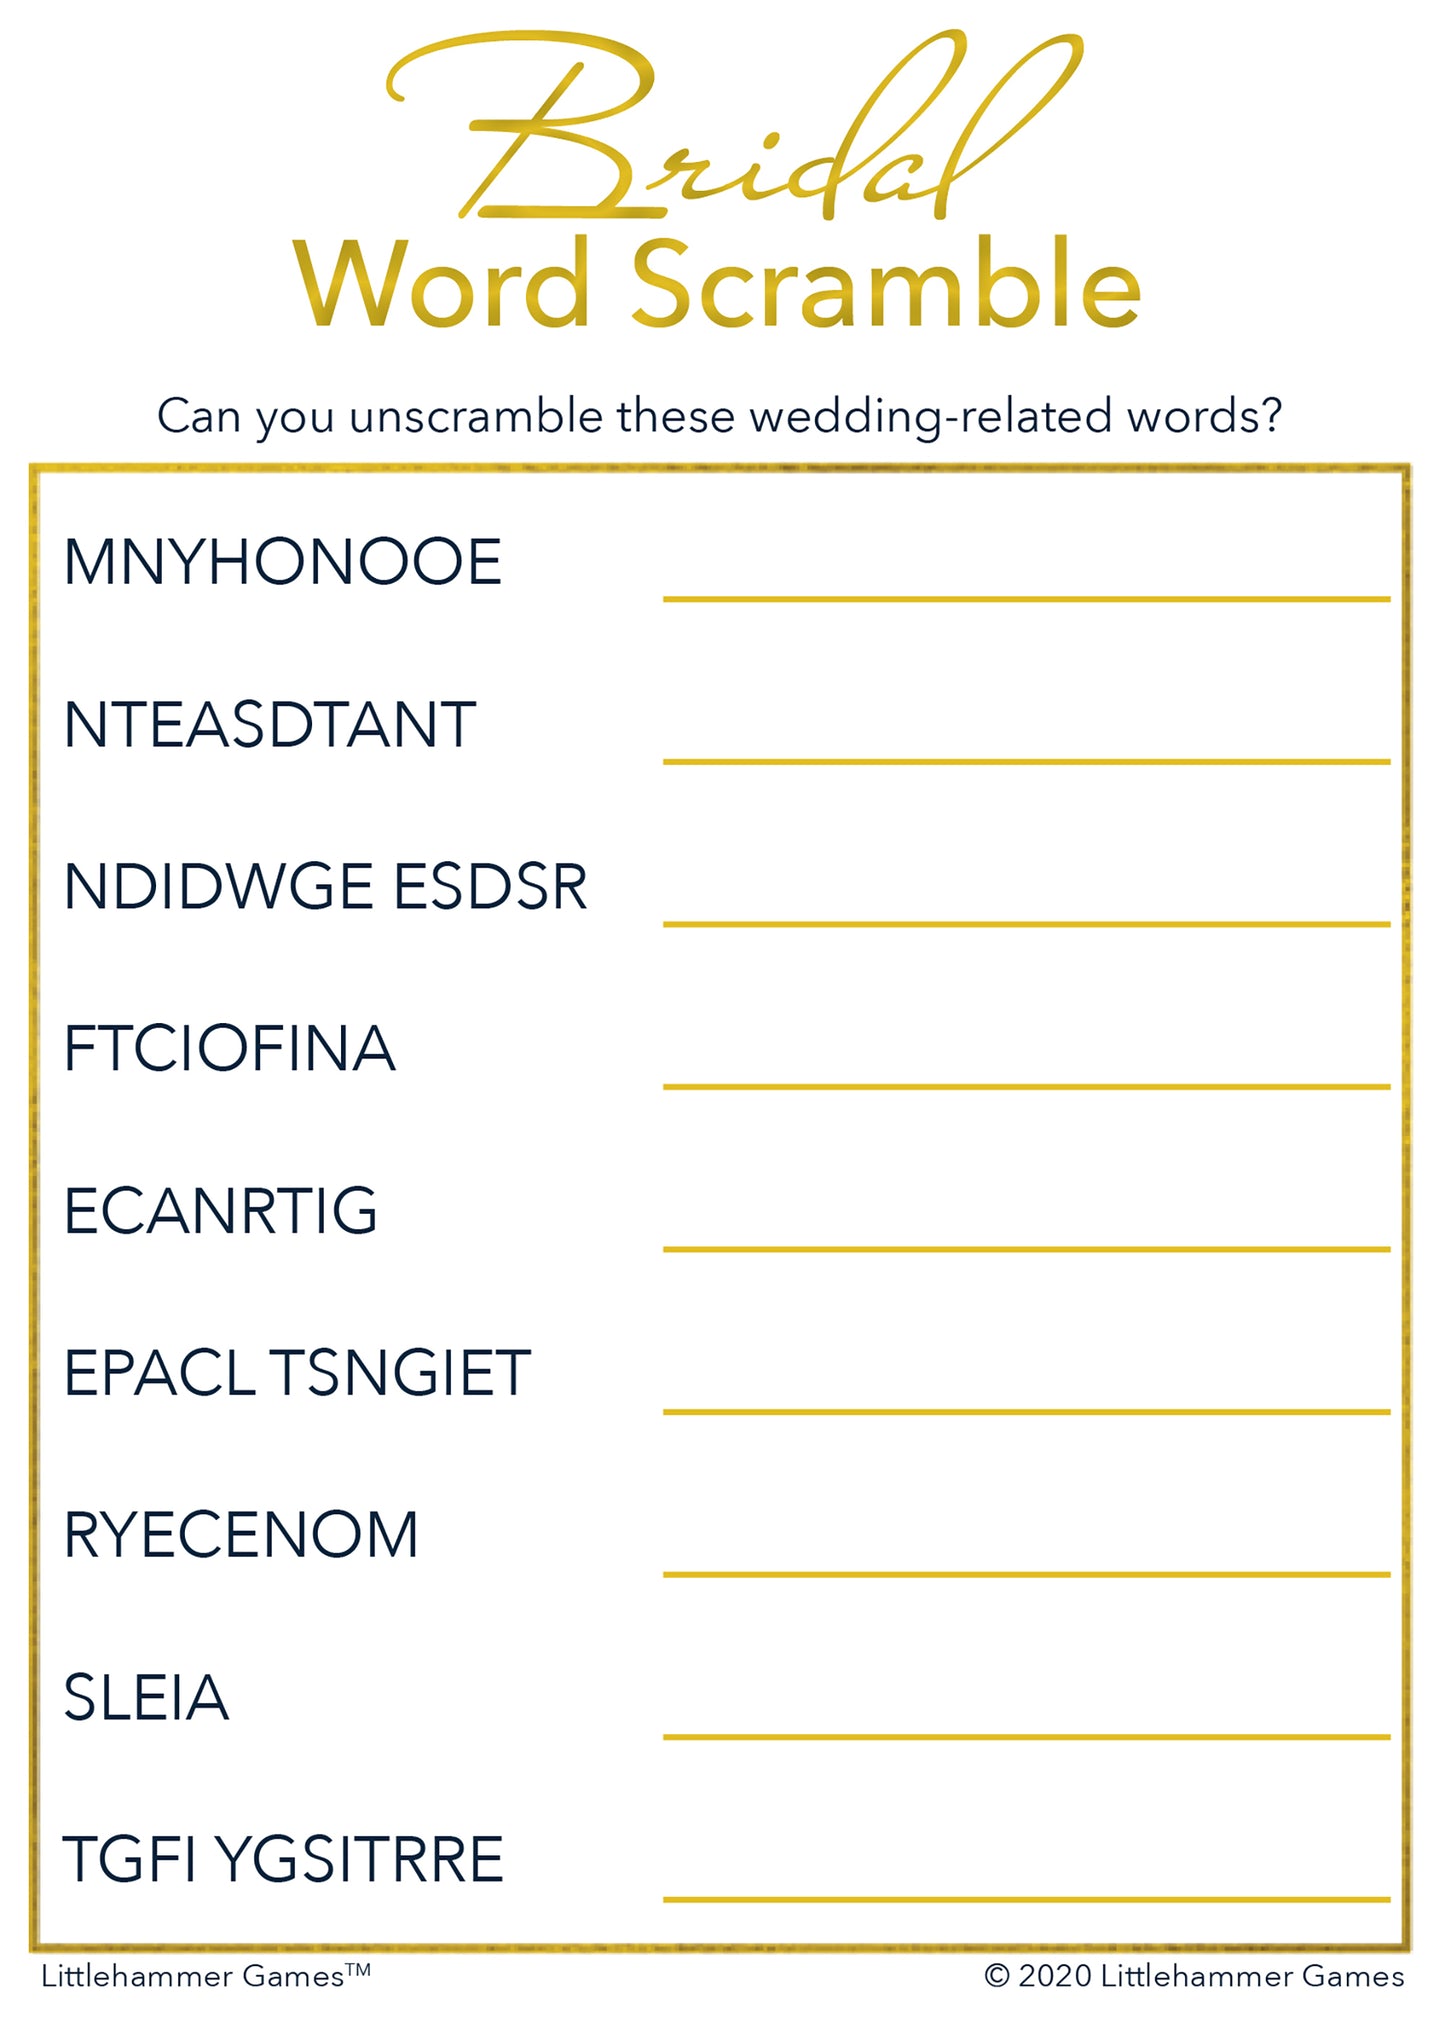 Bridal Word Scramble game card with a gold and white background